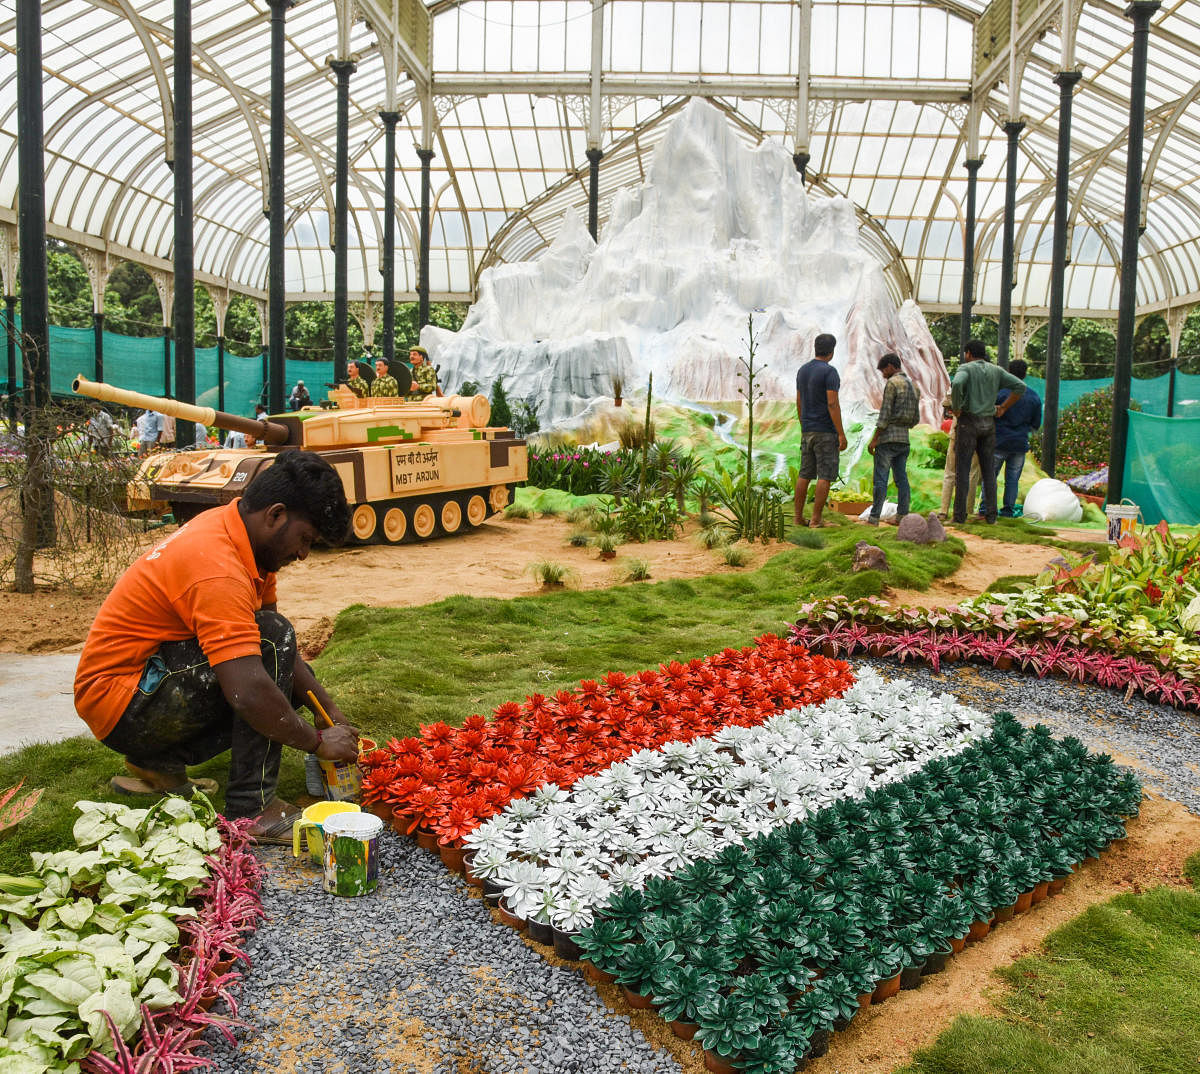 Workers preparing a floral model of the Tricolour at the Lalbagh gardens on Thursday. The show will be on between August 4 and 15. DH Photo/S K Dinesh